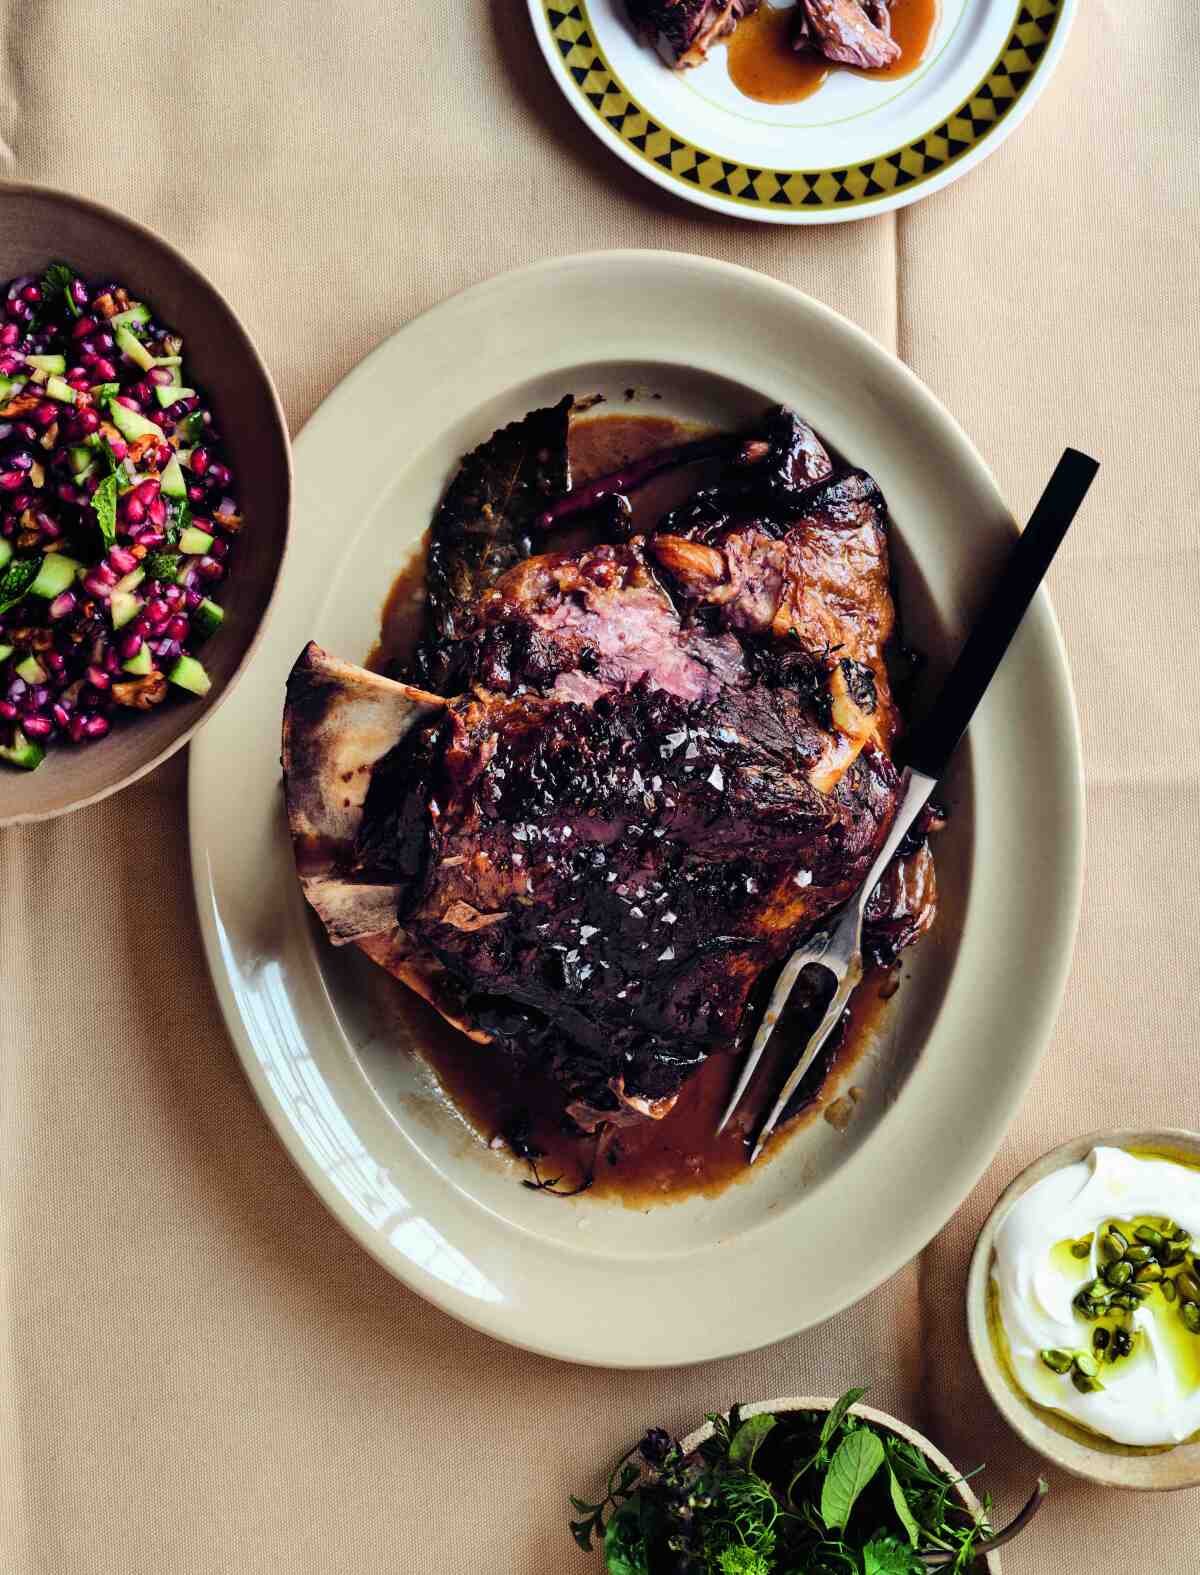 The crushed orange and rosemary braised lamb from "The Cook You Want to Be," by Andy Baraghani.